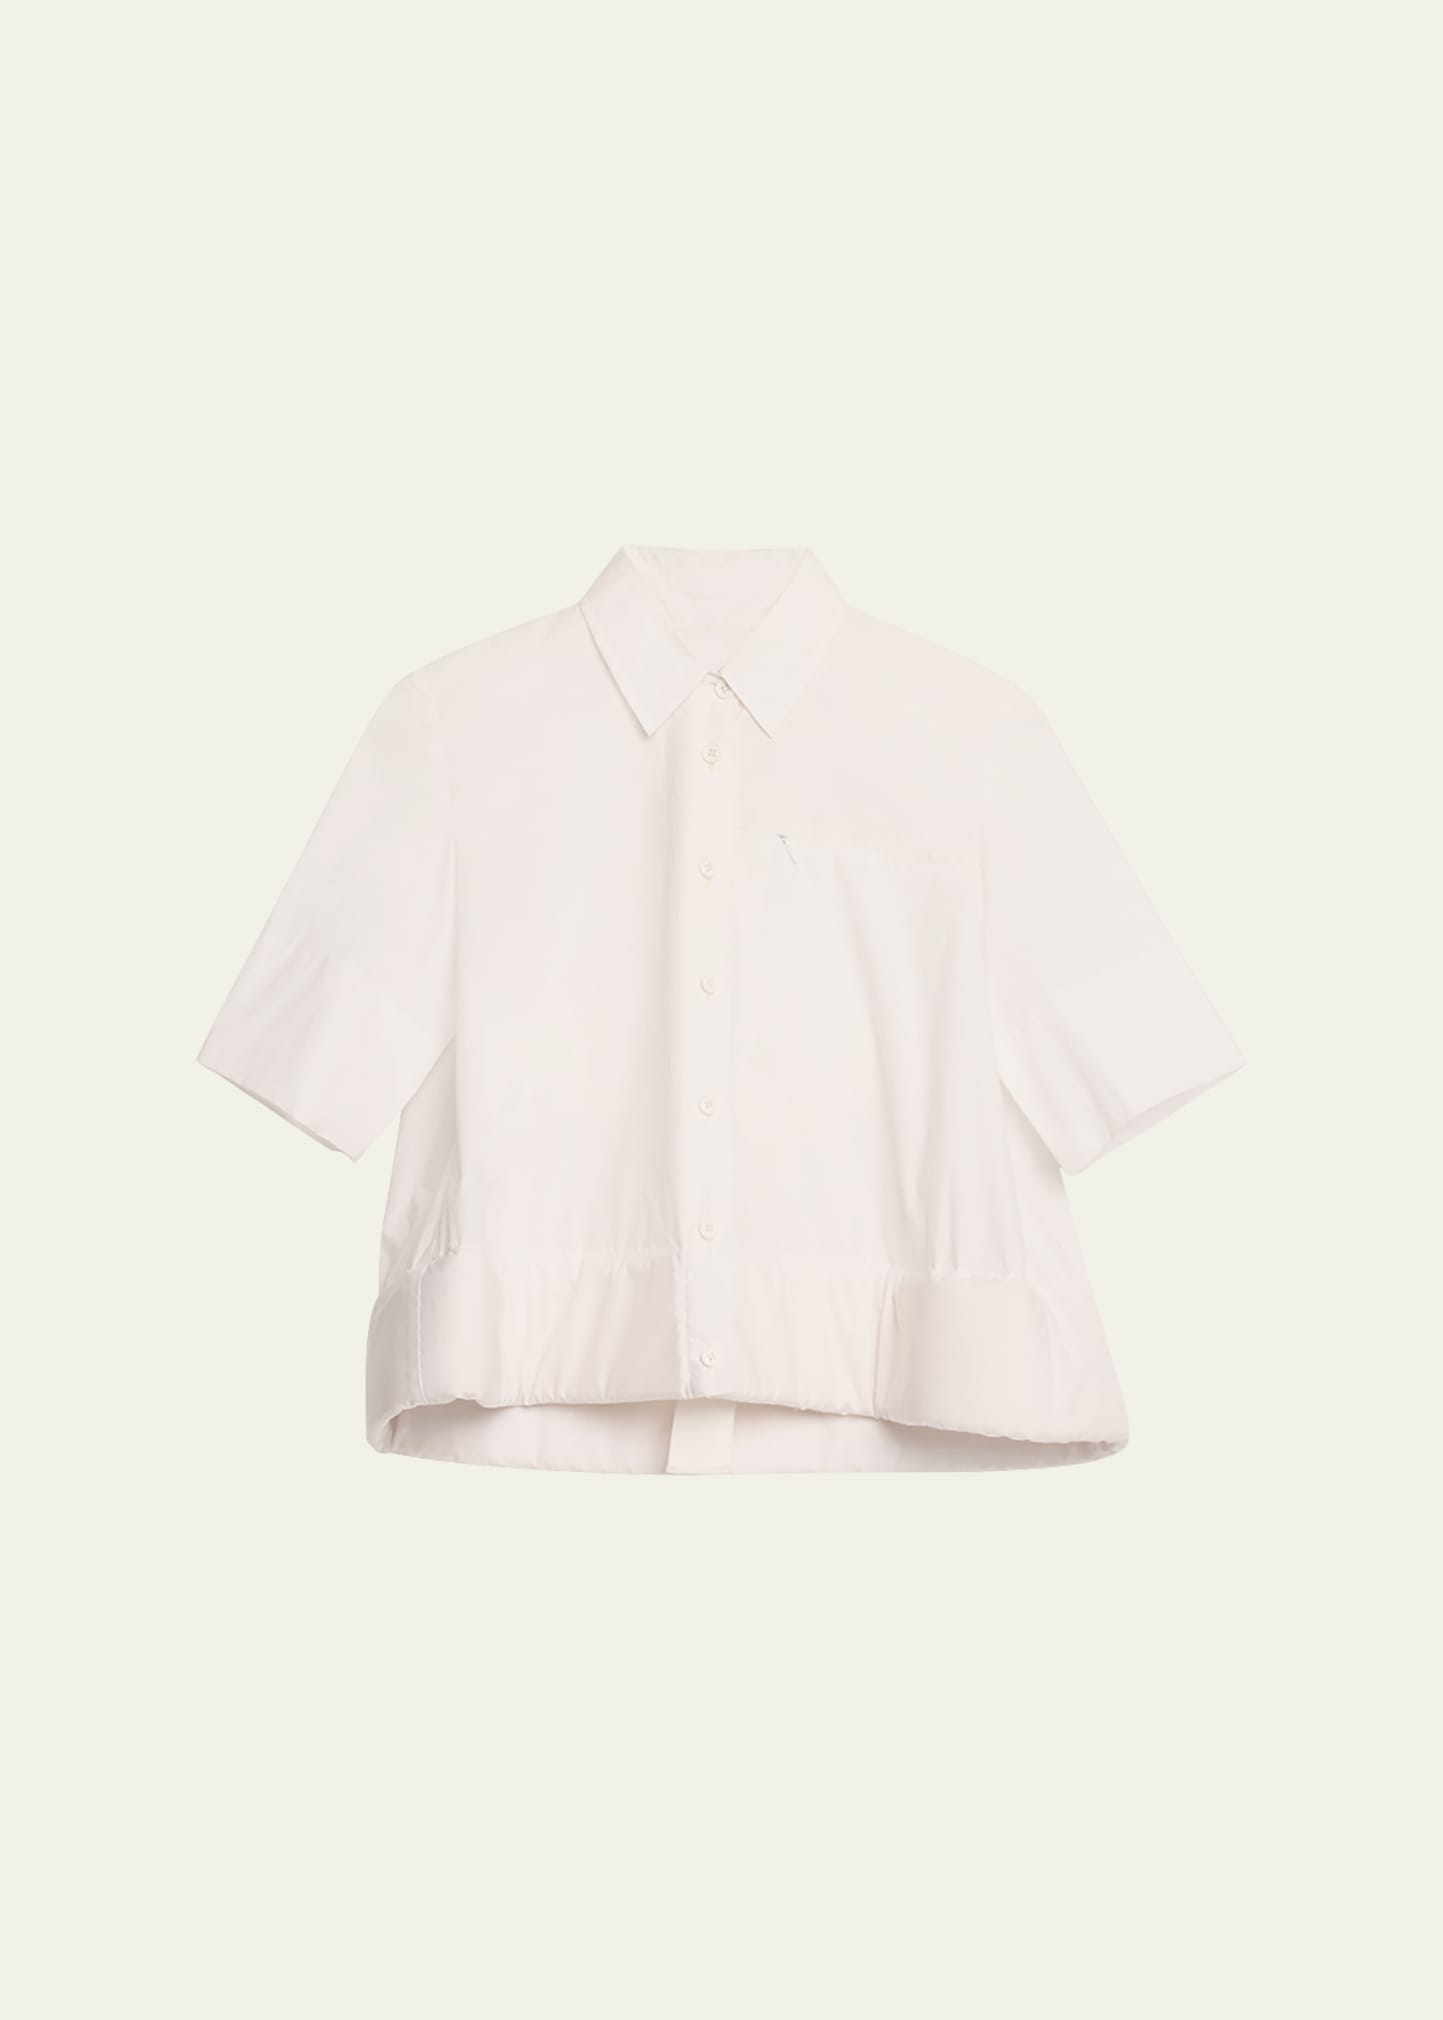 Melitta Baumeister Papery Cotton Shirt In Wht